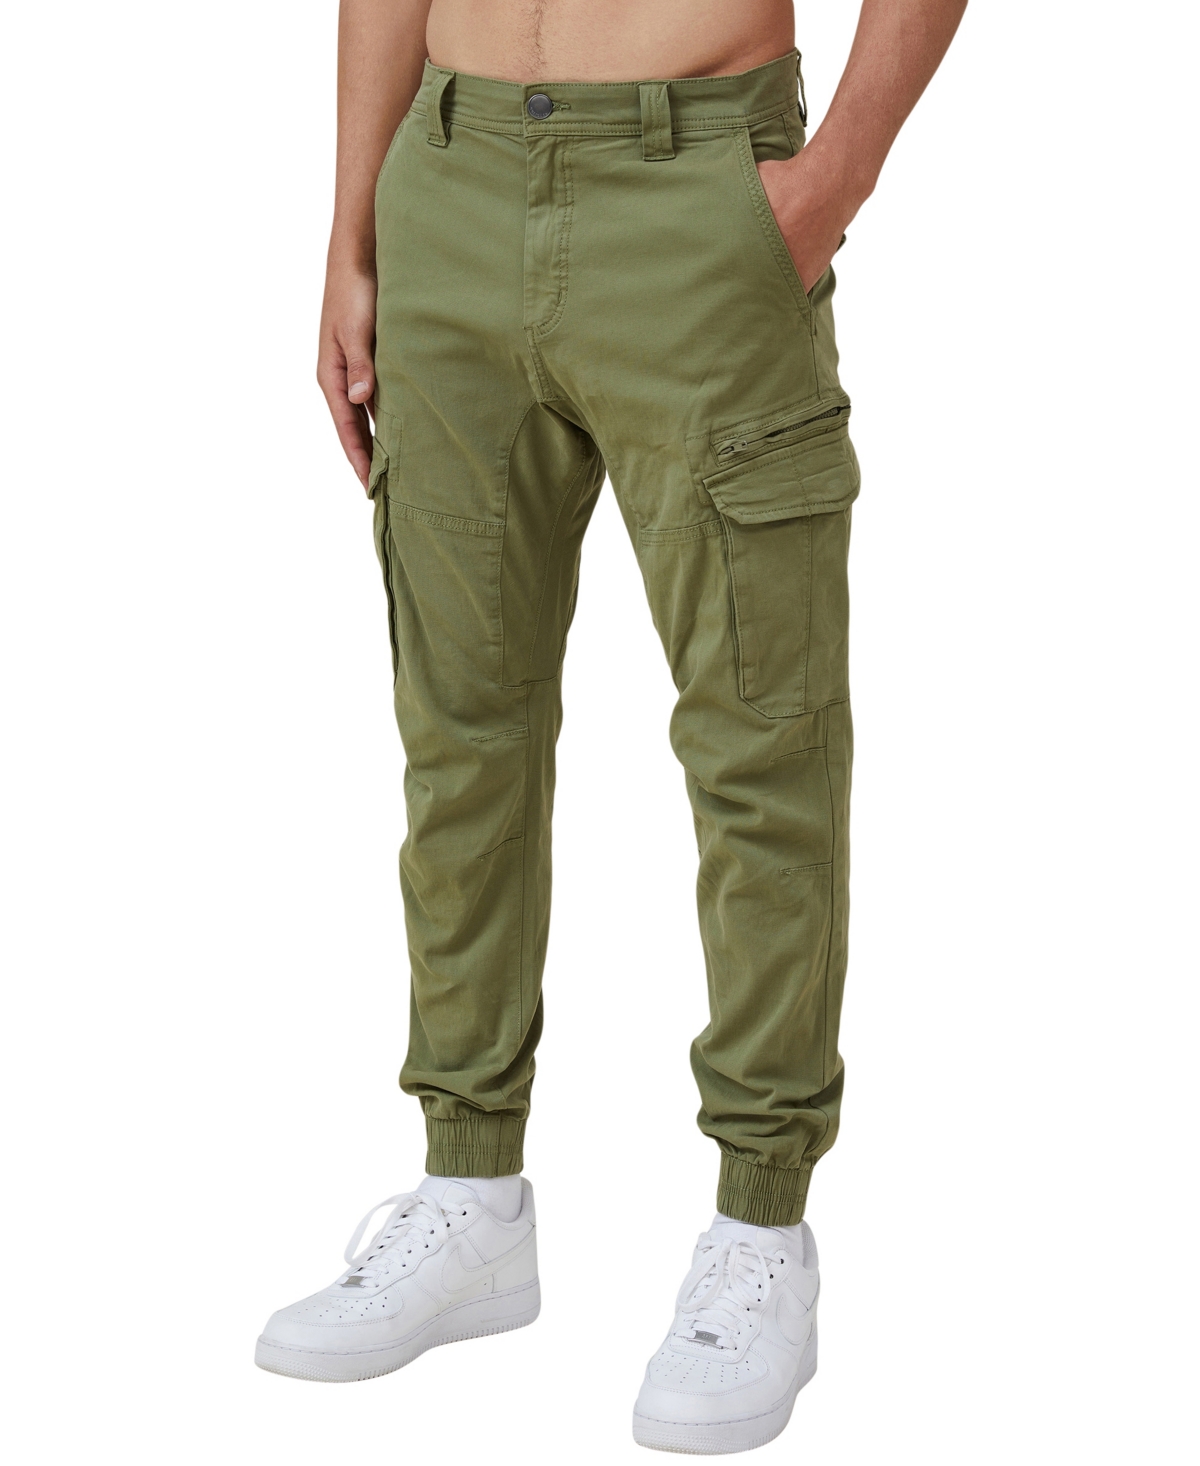 Cotton On Men's Urban Cargo Patch Joggers In Army Green Cargo